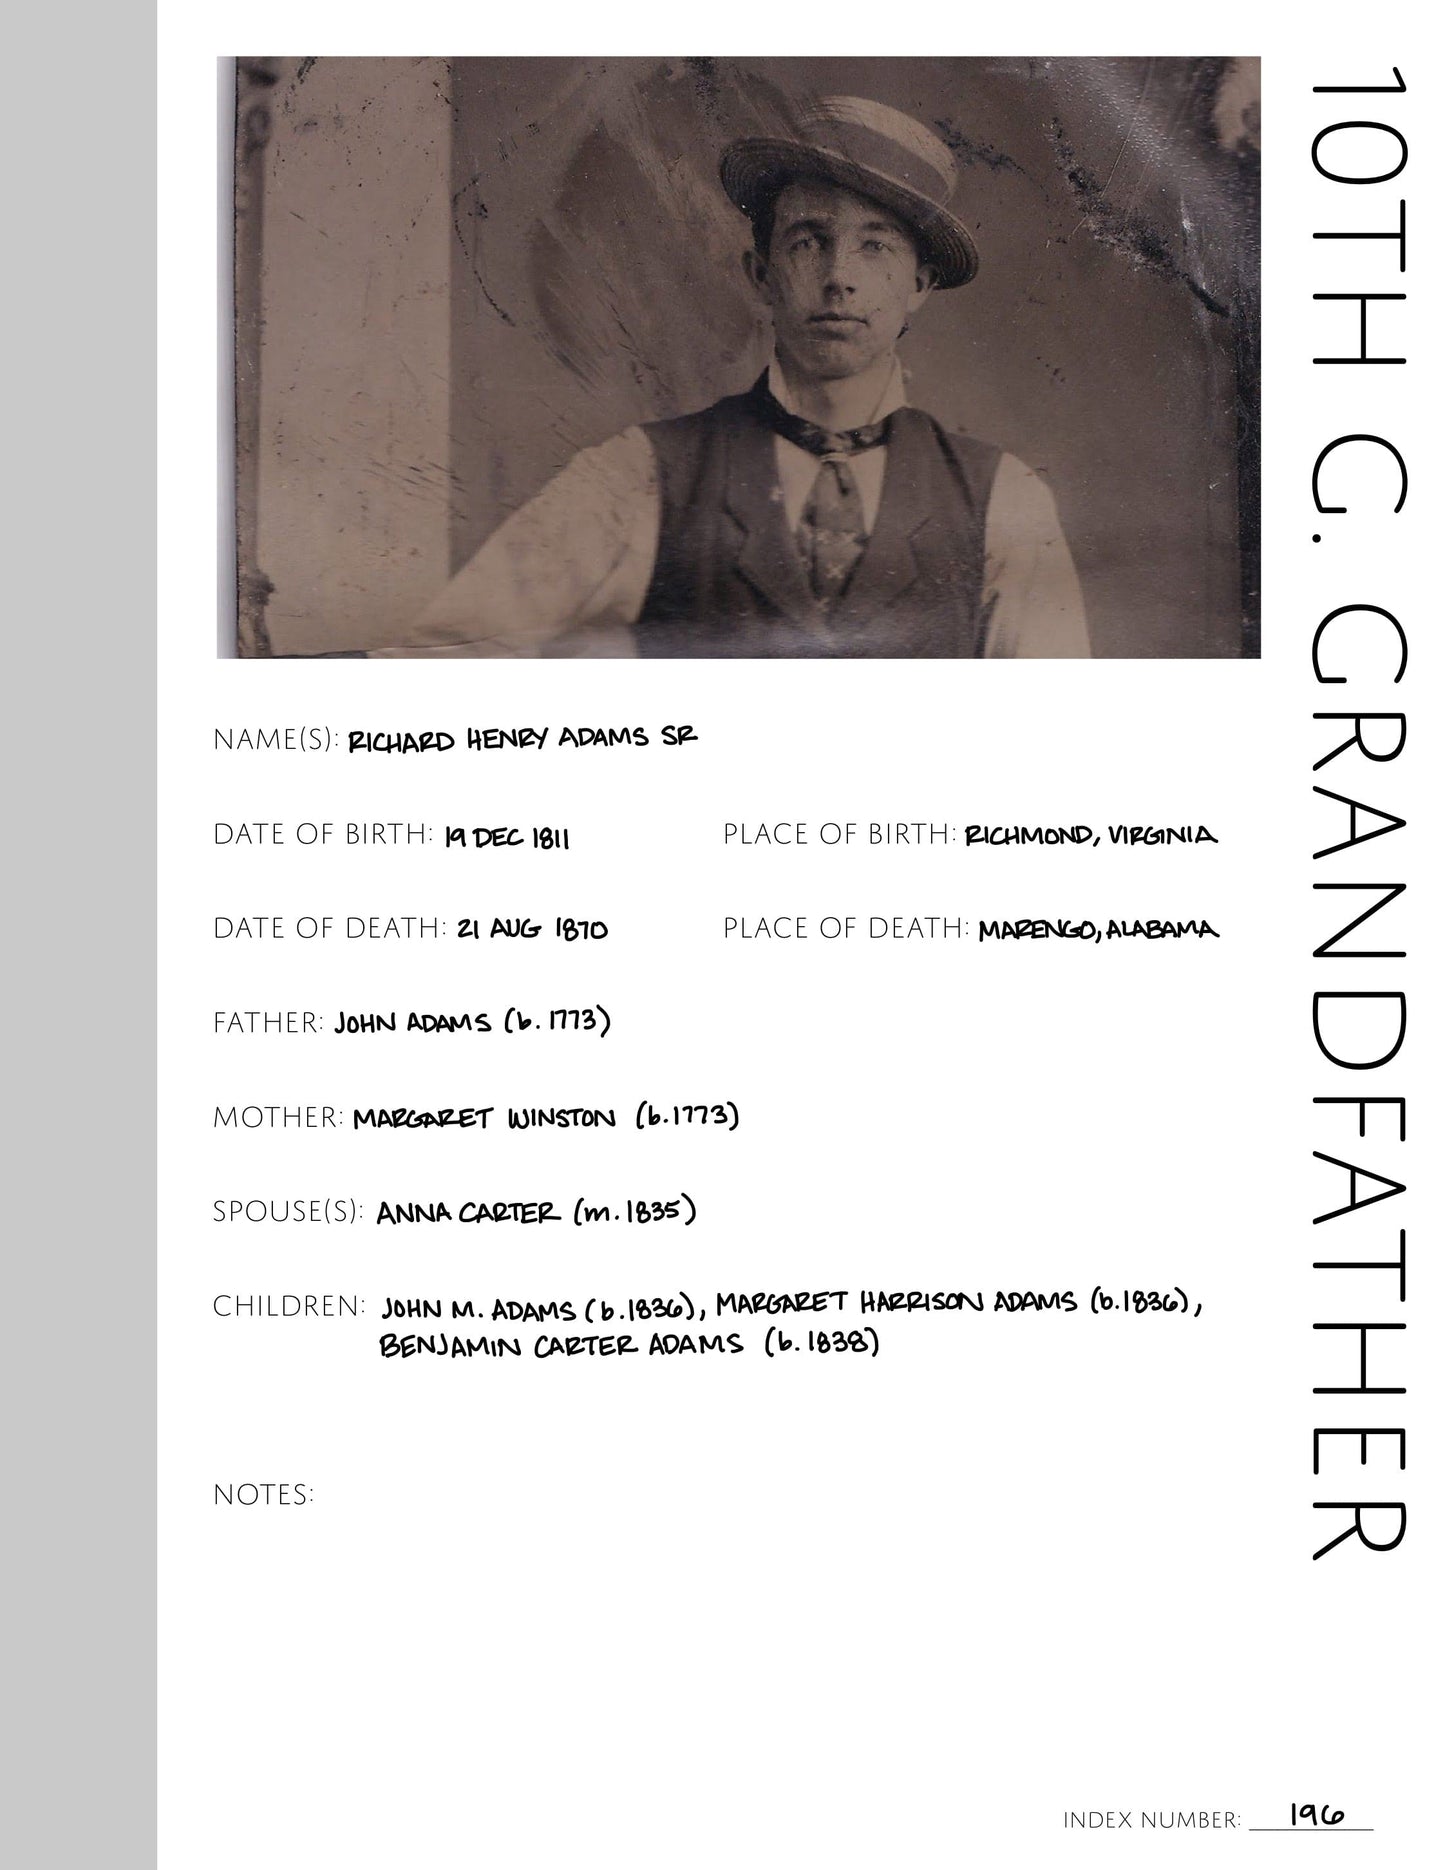 10th Great Grandfather Profile: Printable Genealogy Form (Digital Download)